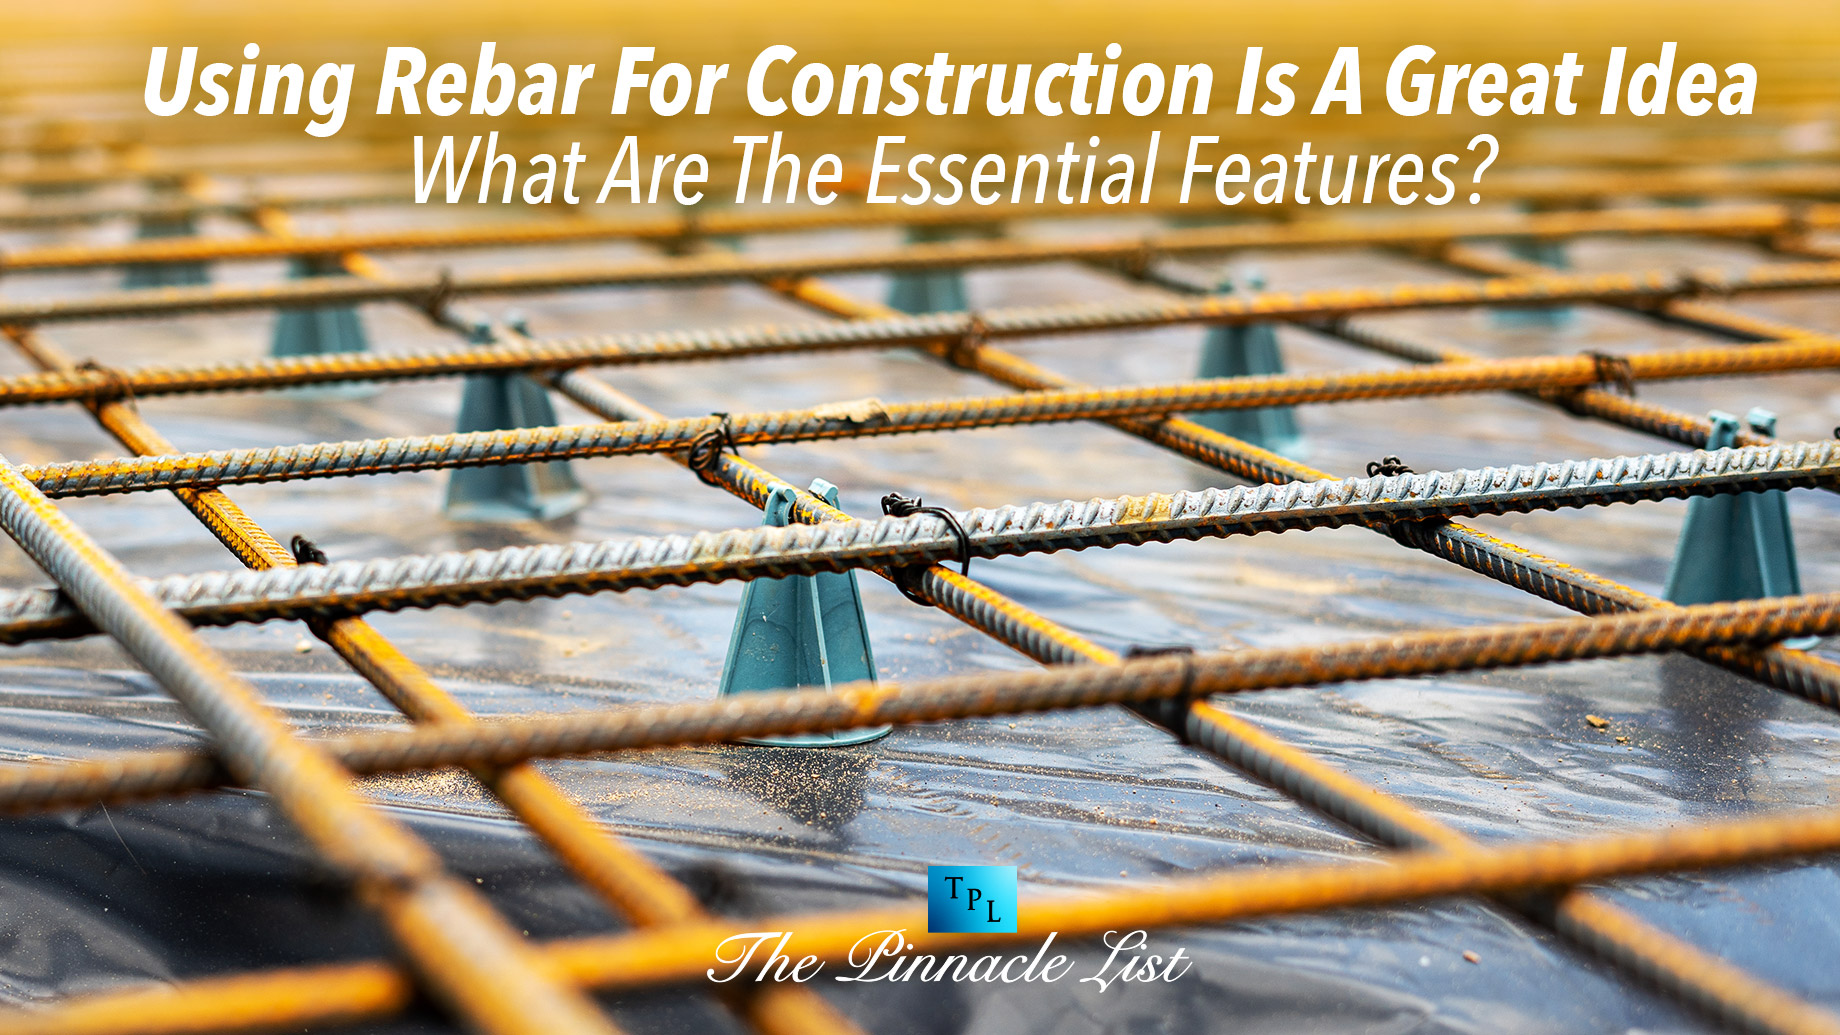 Using Rebar For Construction Is A Great Idea - What Are The Essential Features?